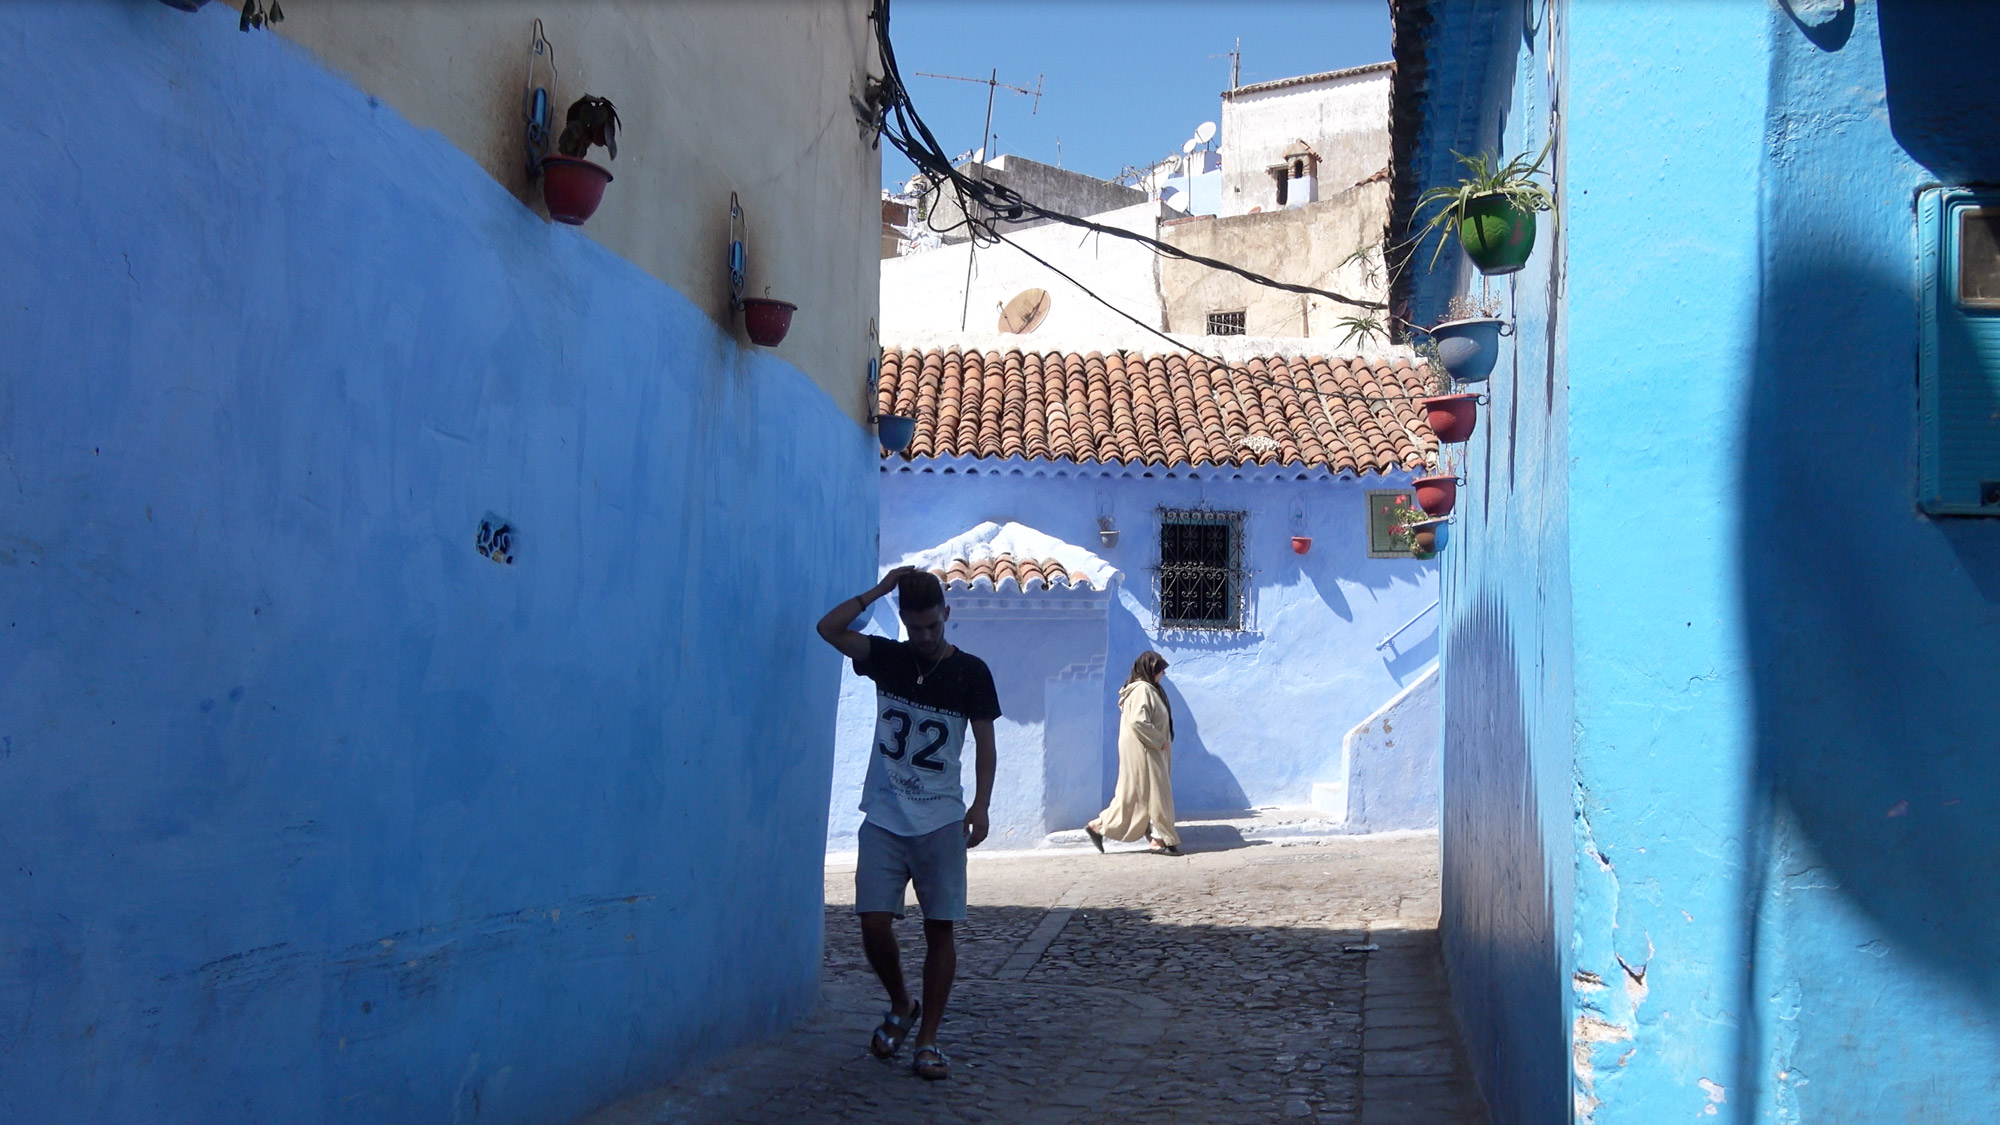 The picturesque town of Chefchaouen is the main attraction for tourists. Rural tourism operators want more visitors to set foot outside the town.